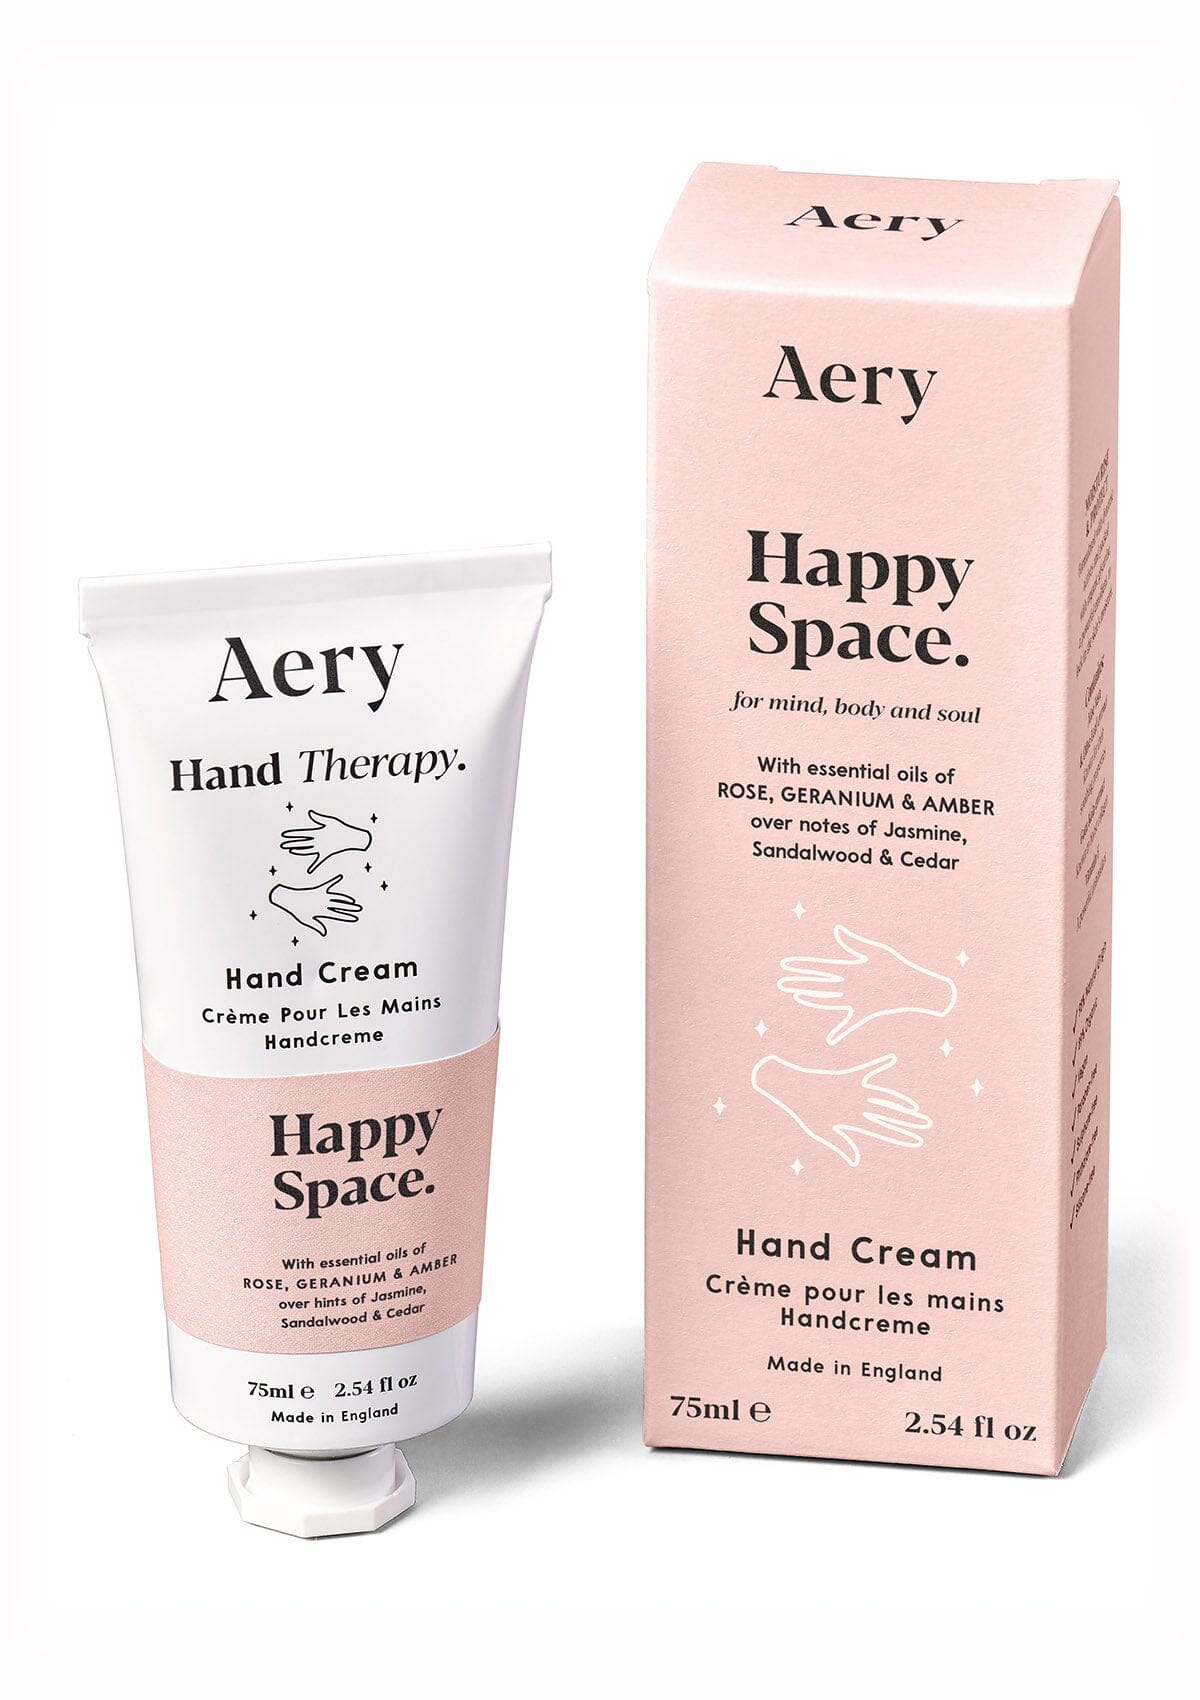 Pink Happy space hand cream displayed next to product packaging by Aery on white background 